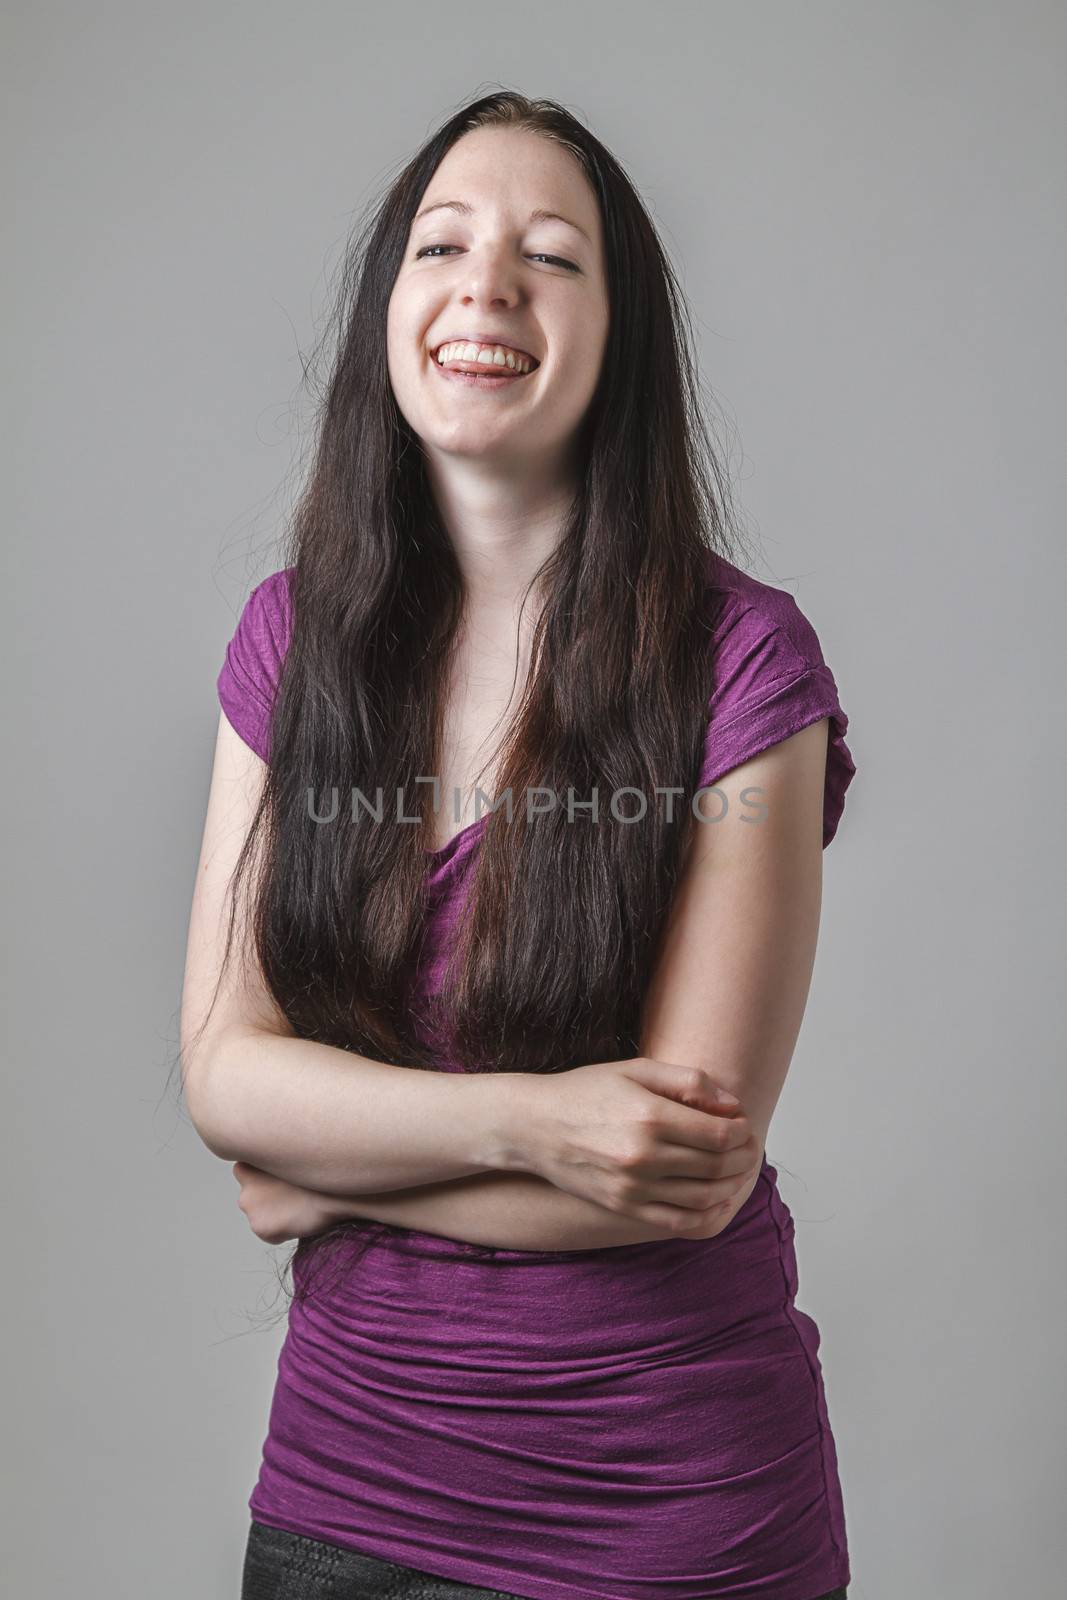 young woman with long black hair and a purple shirt laughing, holding her stomach and sticking out her tongue